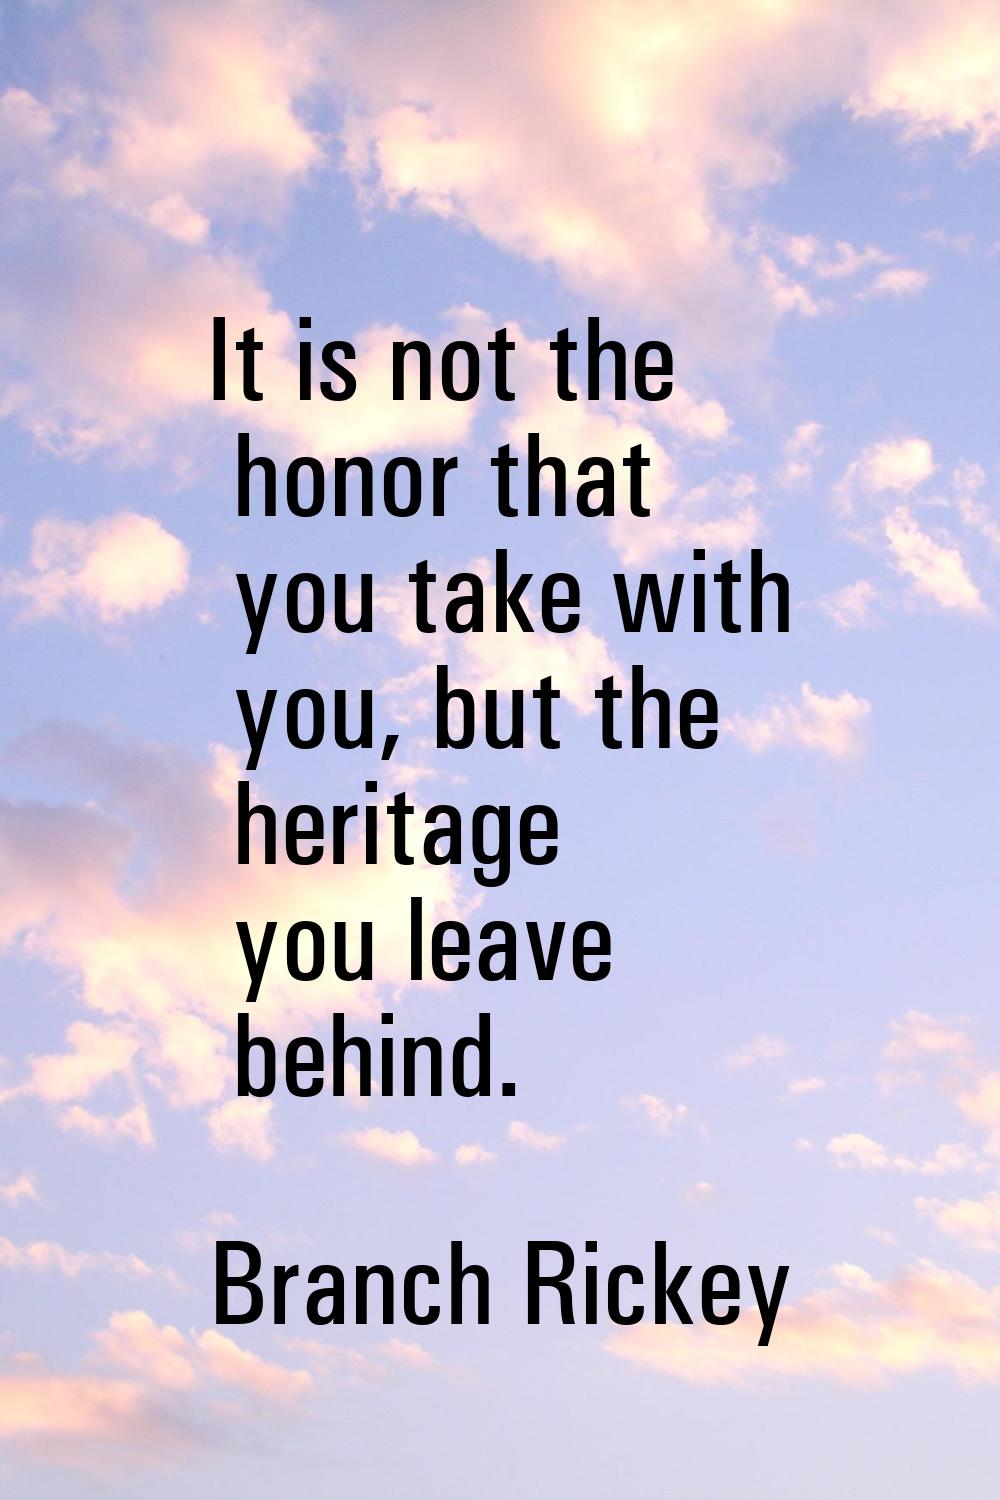 It is not the honor that you take with you, but the heritage you leave behind.